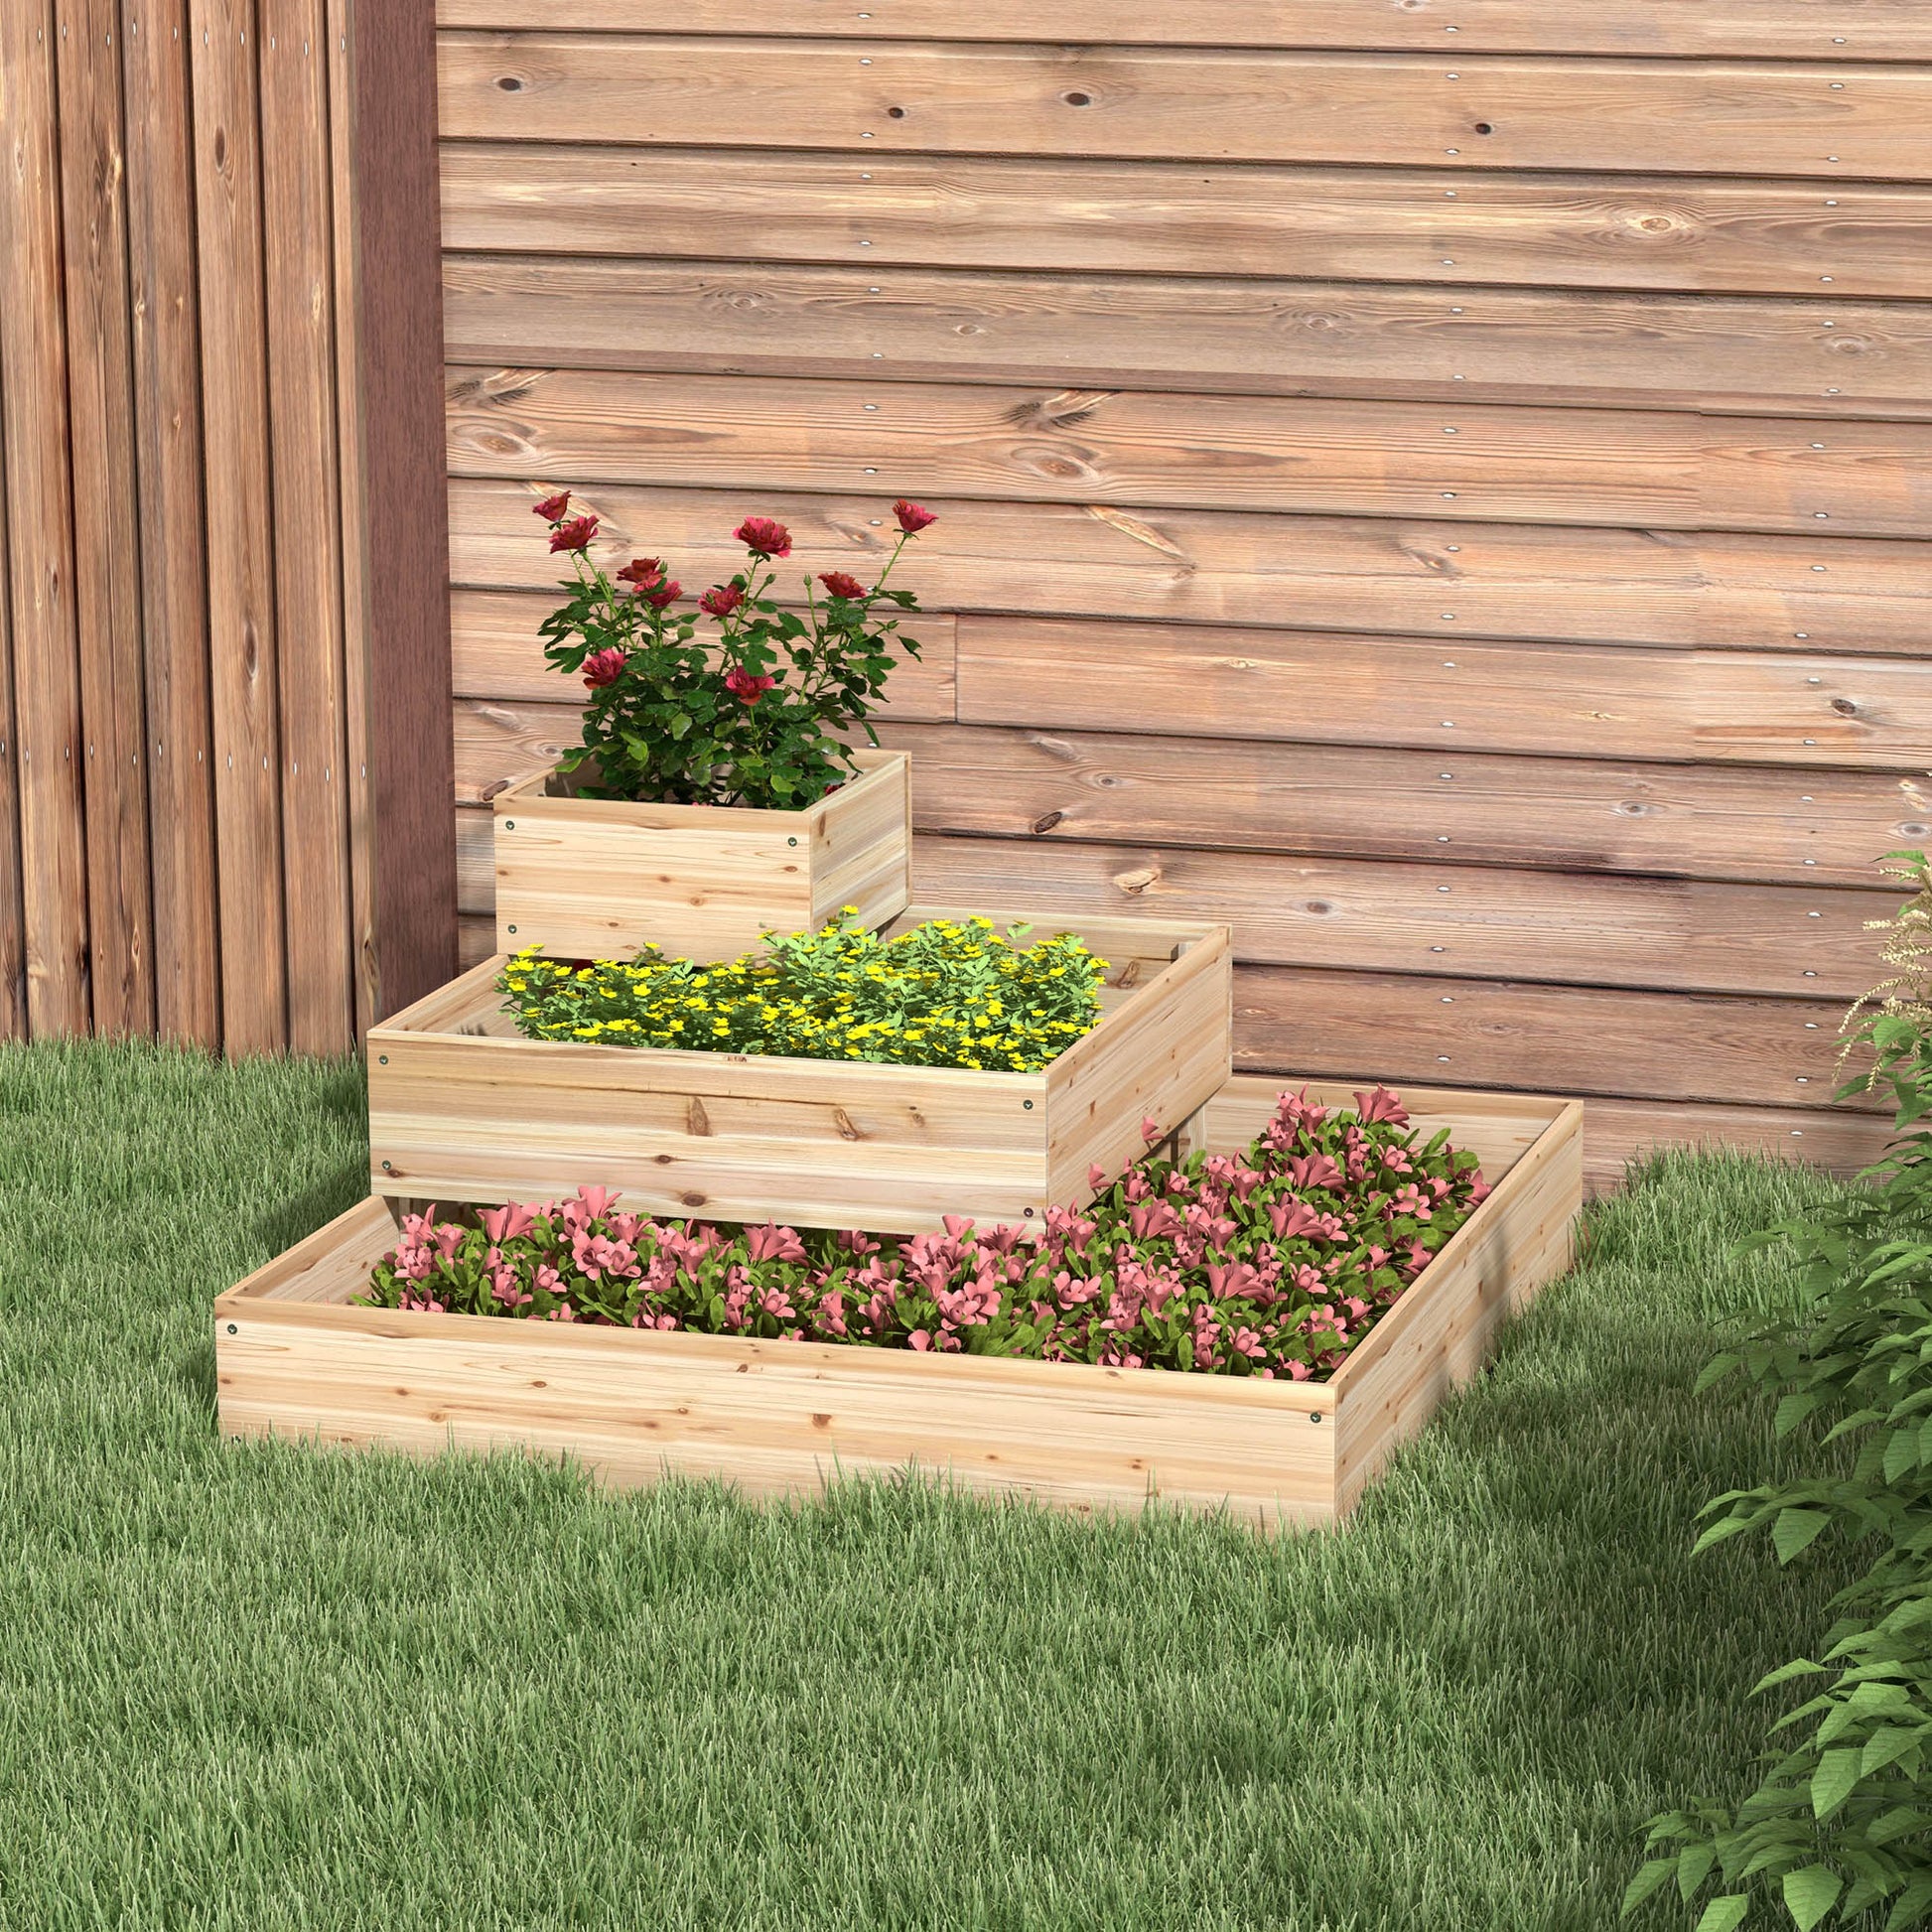 Outdoor Elevated Planter Box, 3-Tier Wooden Raised Garden Bed for Vegetables, Flowers and Herbs, 43.3" x 43.3" x 20.1" at Gallery Canada